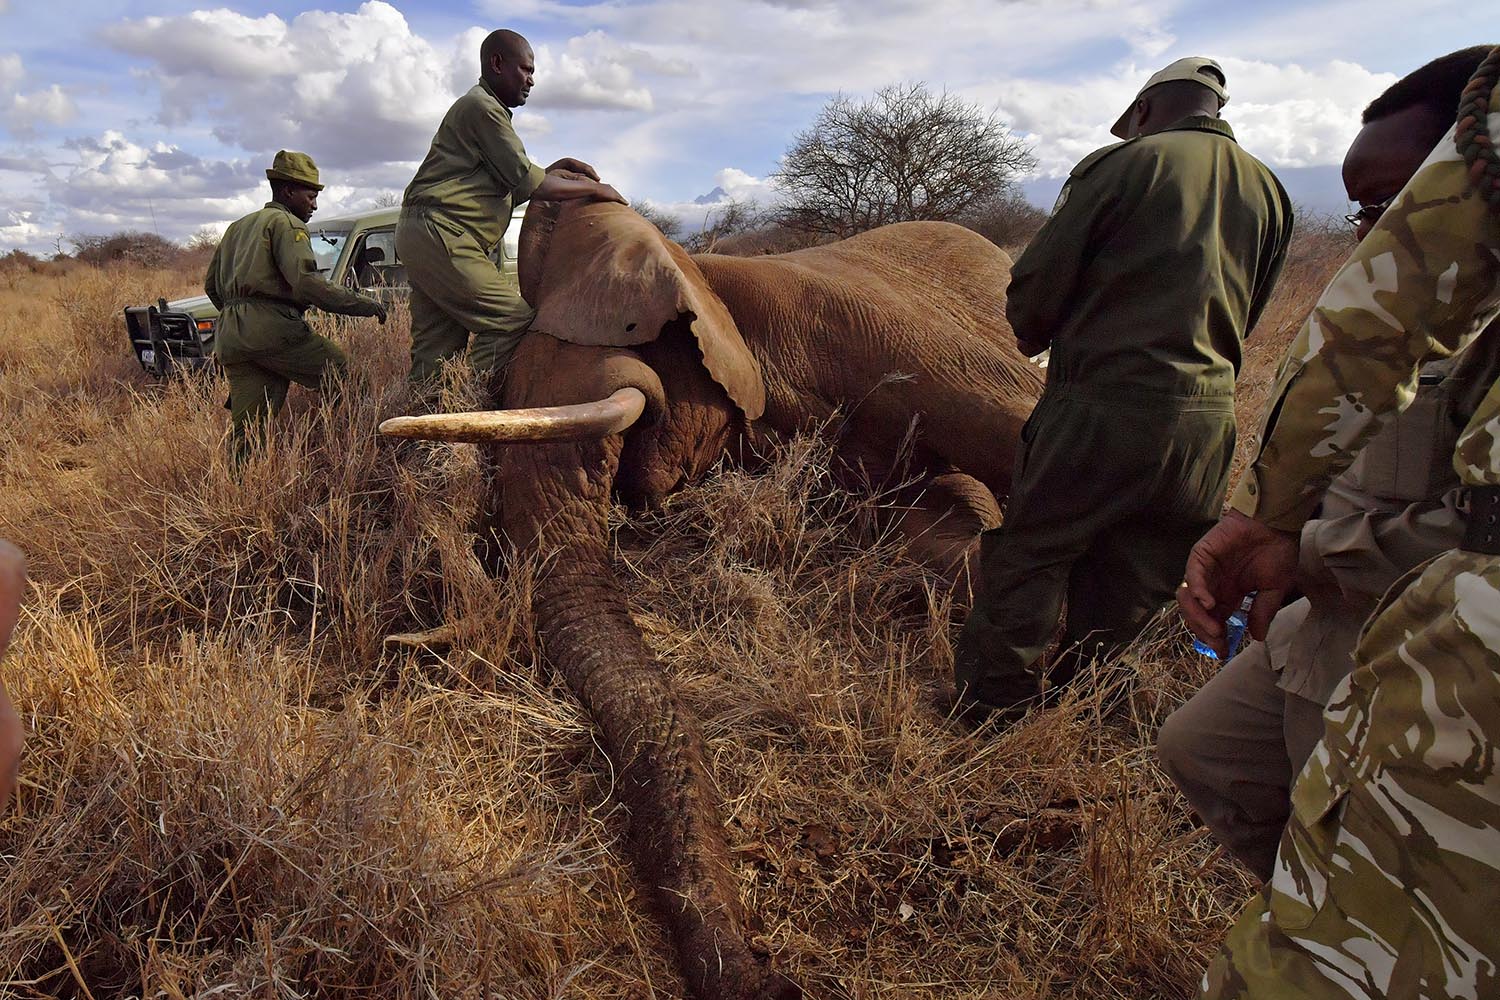 Veterinarians and park rangers attend to a sedated elephant outside Amboseli National Park in Kenya on Nov. 2, 2016. The International Fund for Animal Welfare collared two young male elephants from the Amboseli region to better understand their migration routes and how they’ve been impacted by increasing populations.